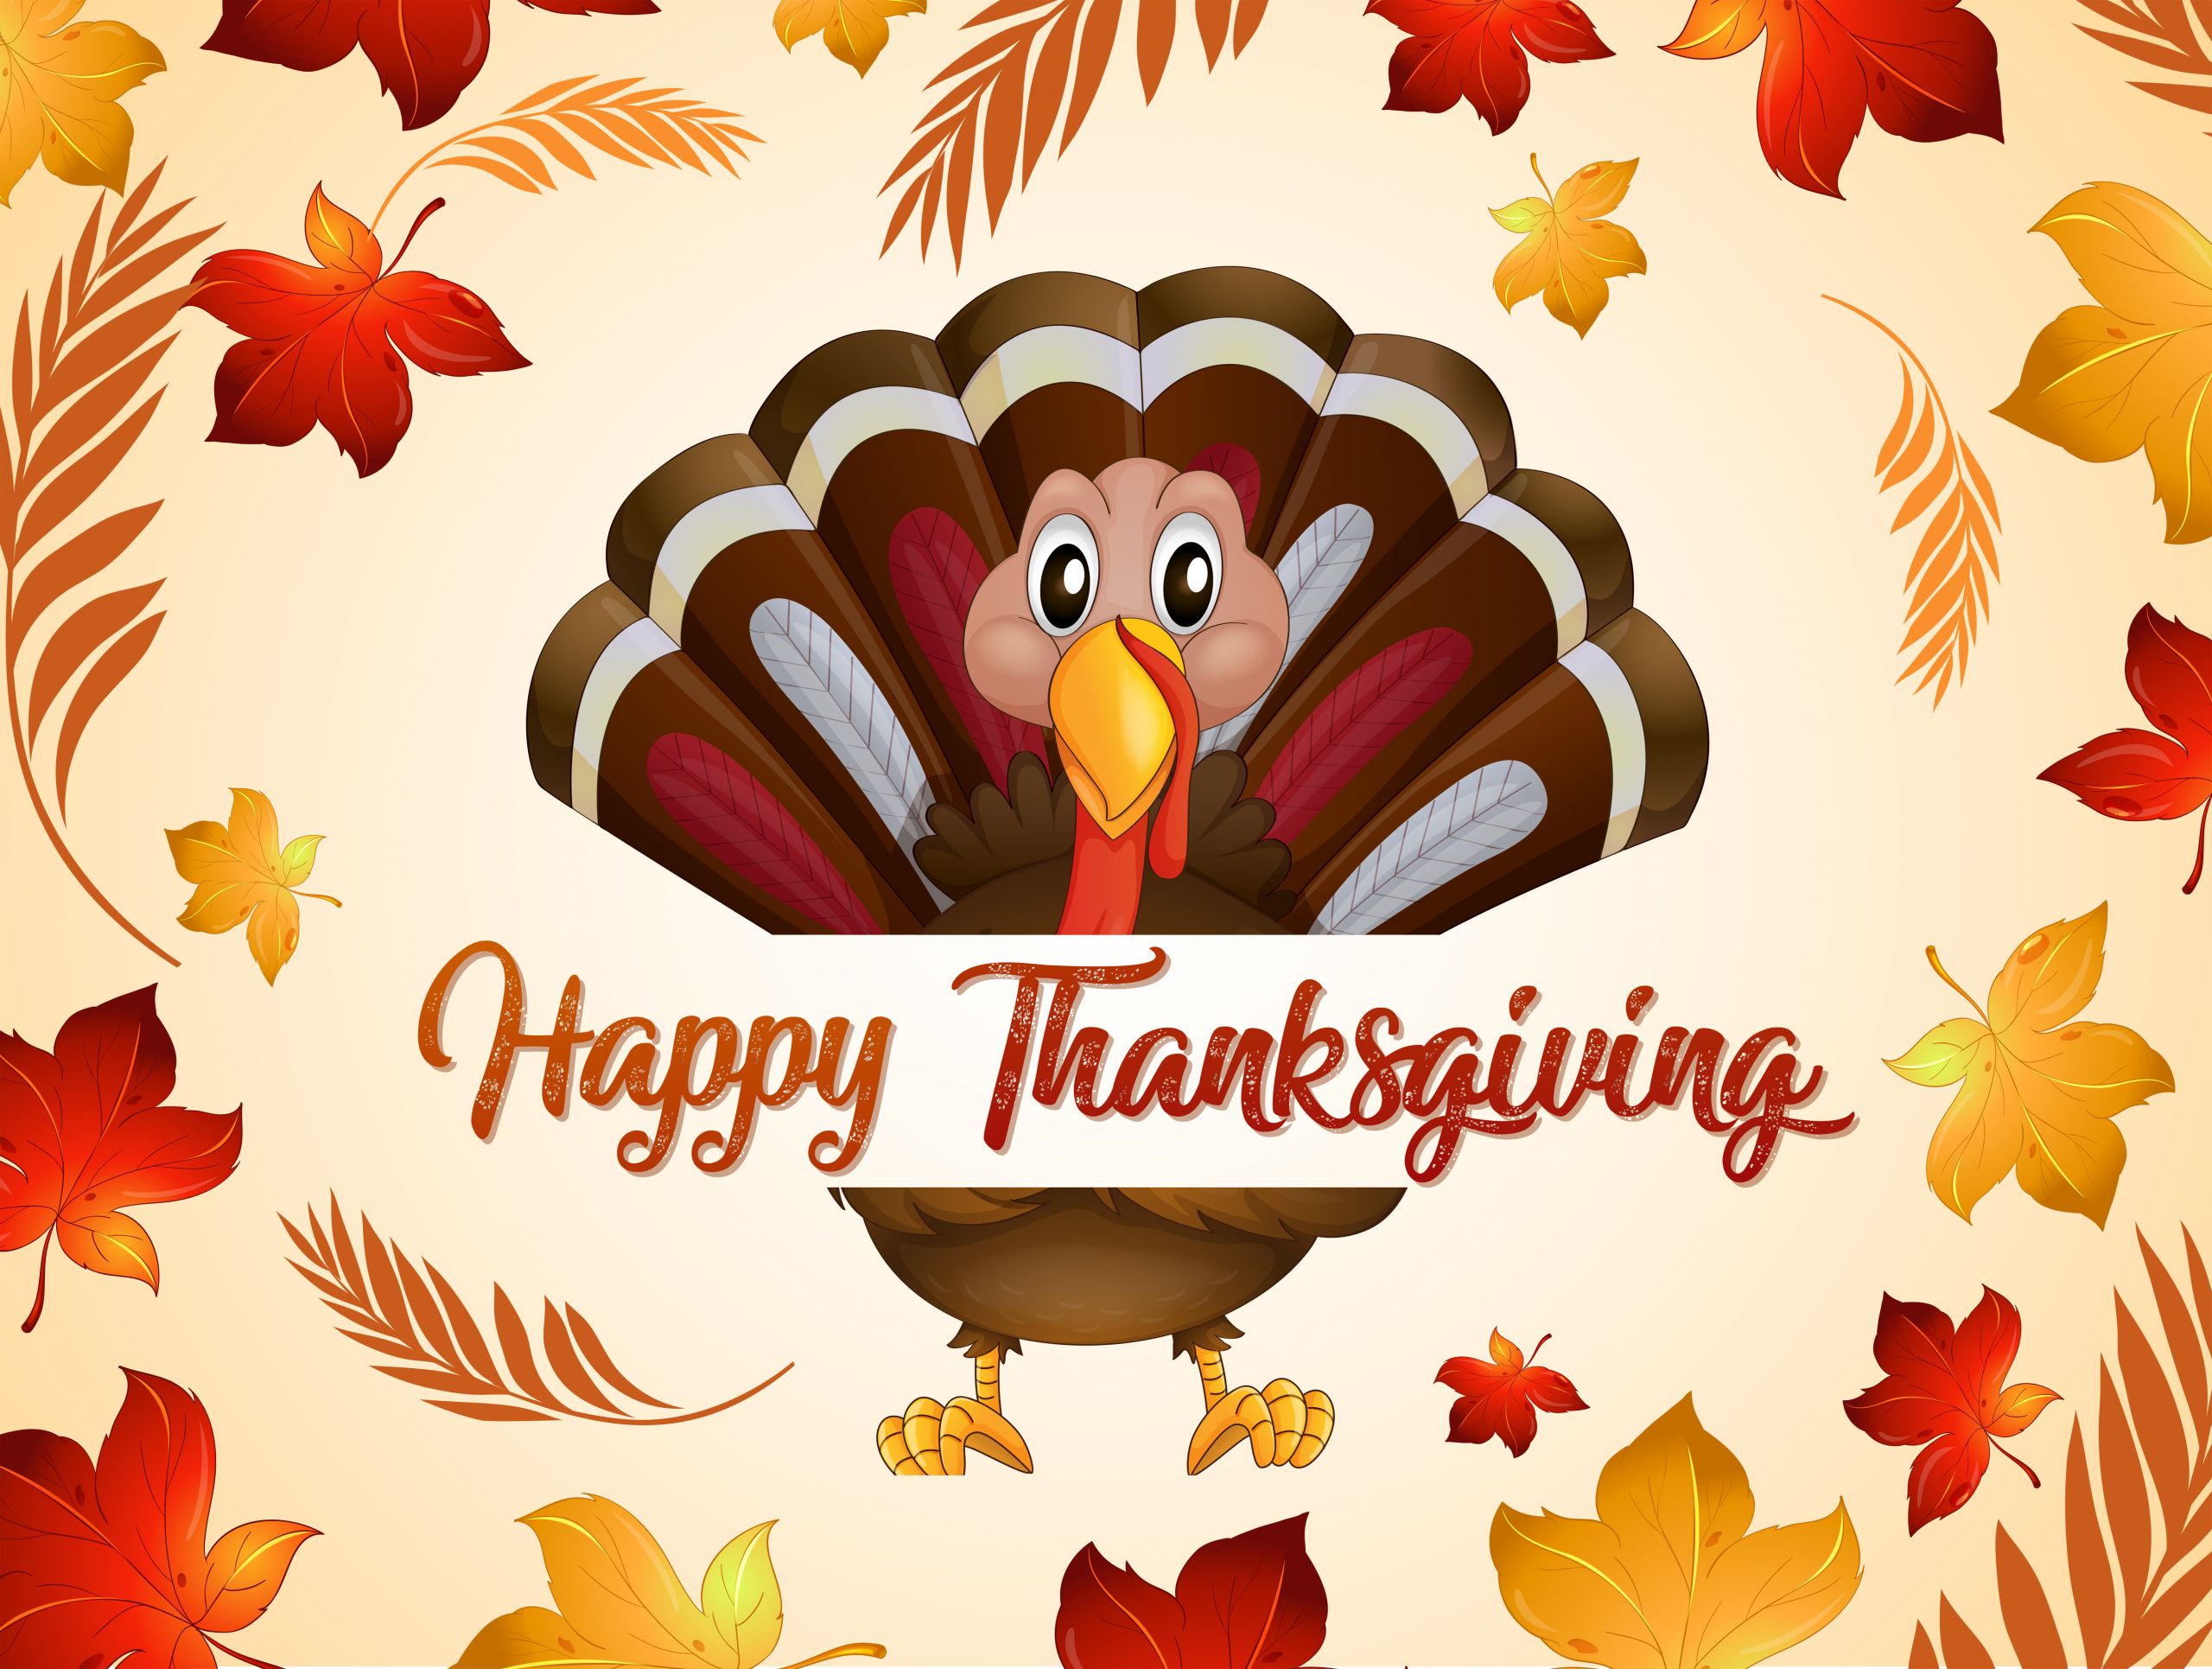 Happy Thanksgiving Turkey
 Happy thanksgiving turkey in autumn Download Free